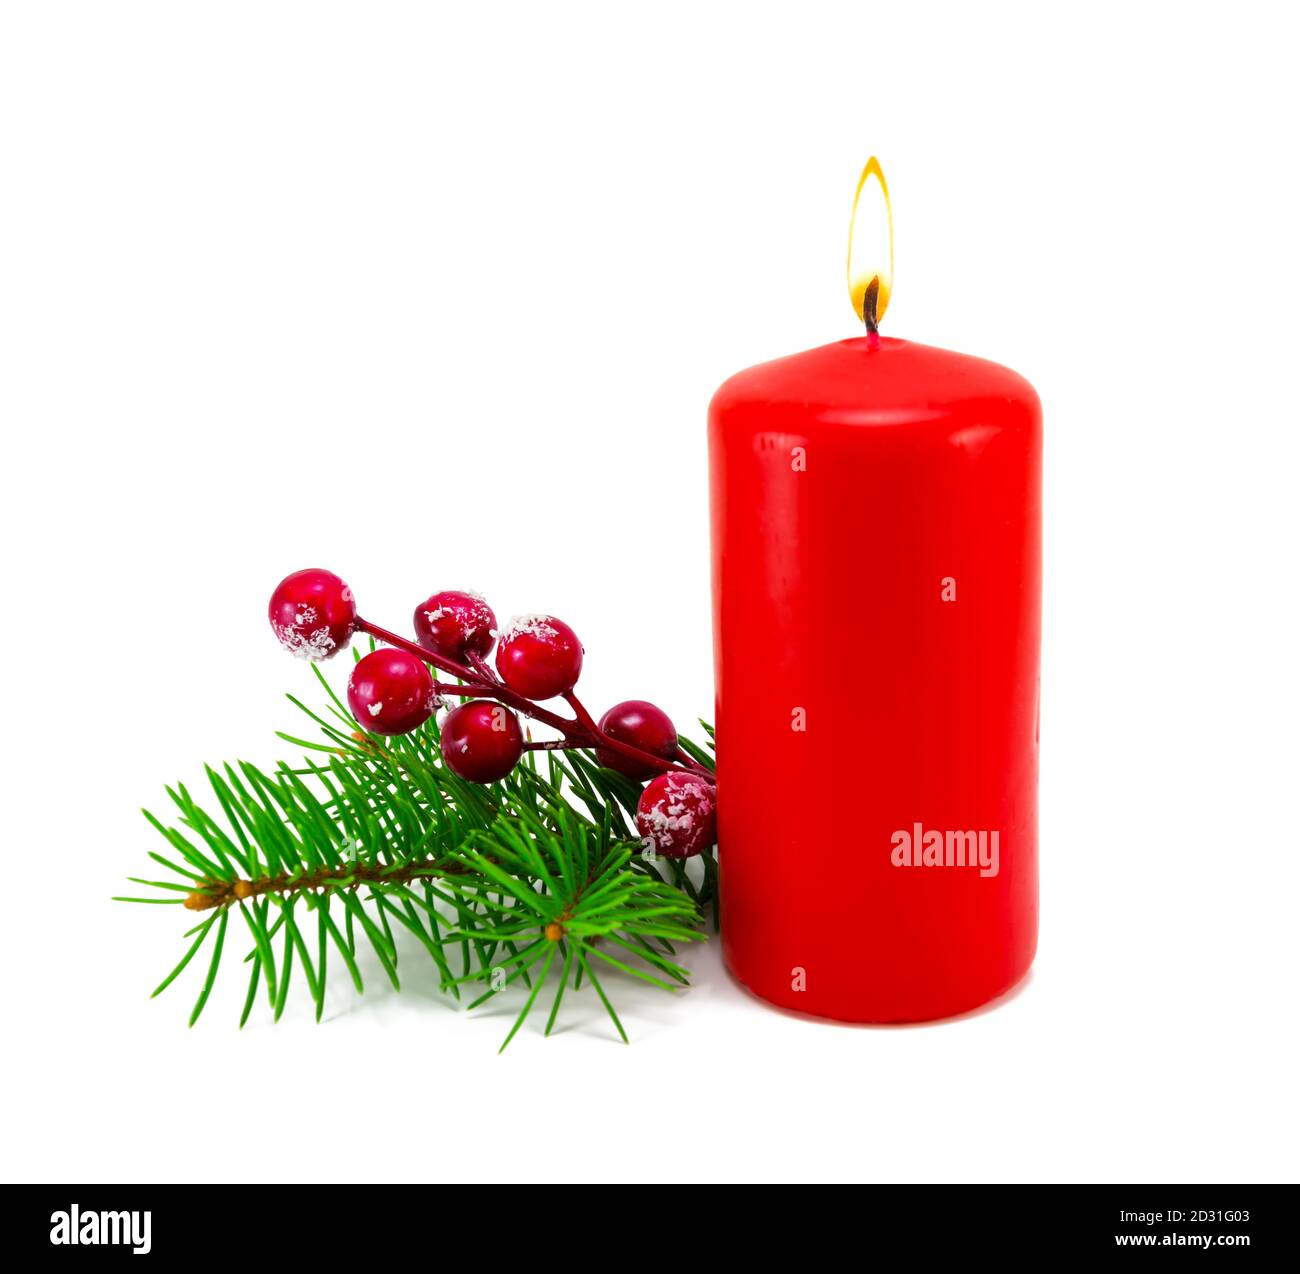 Christmas decoration with candles and branches of fir tree. Christmas fir tree branch with red candle isolated on white background. Stock Photo